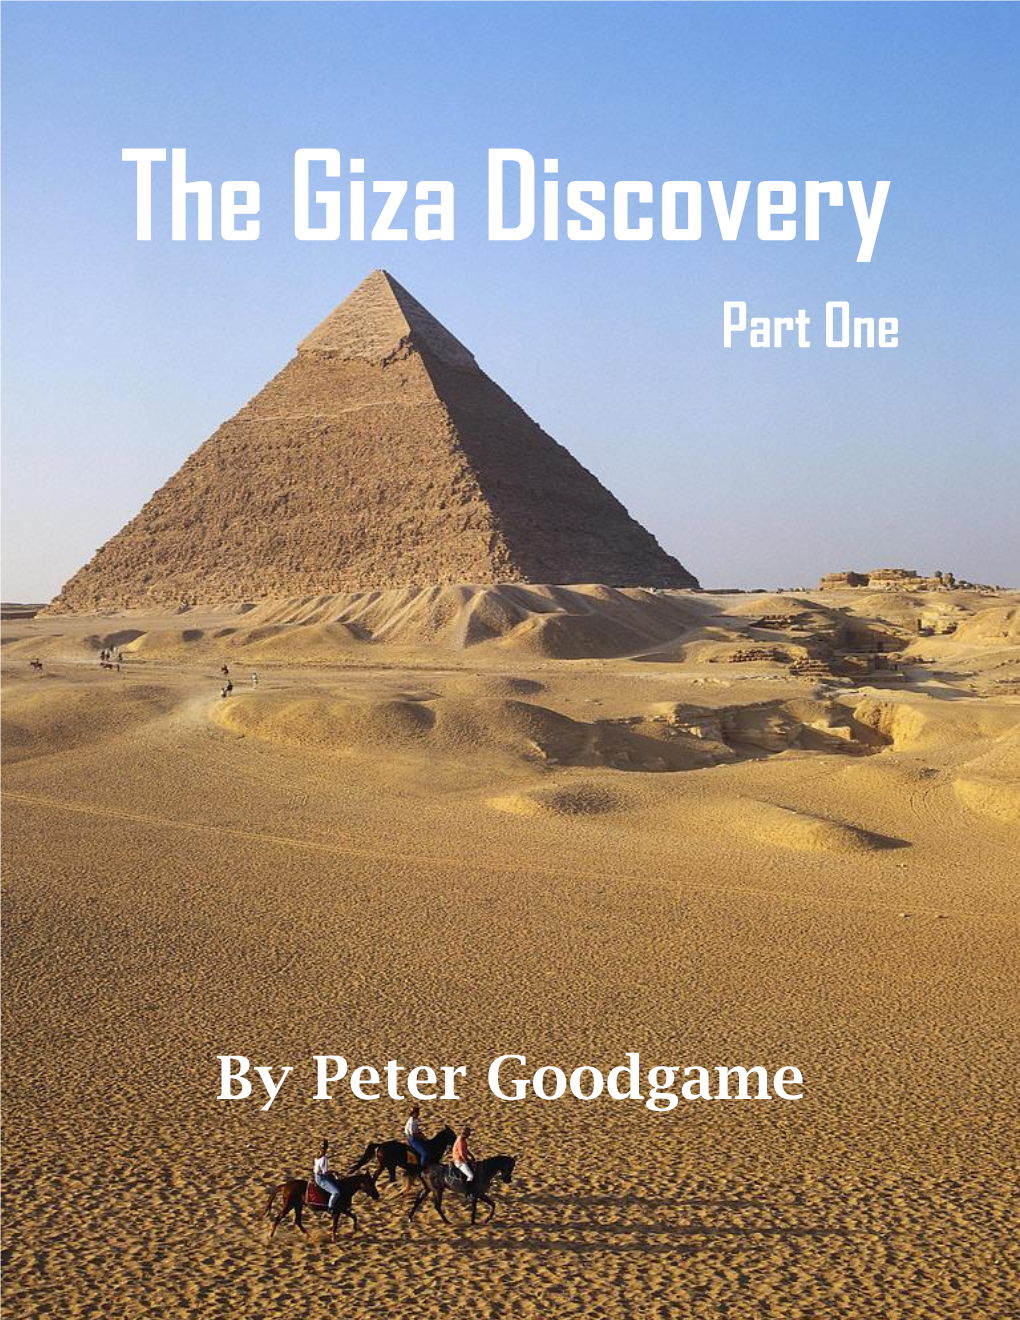 Part One by Peter Goodgame